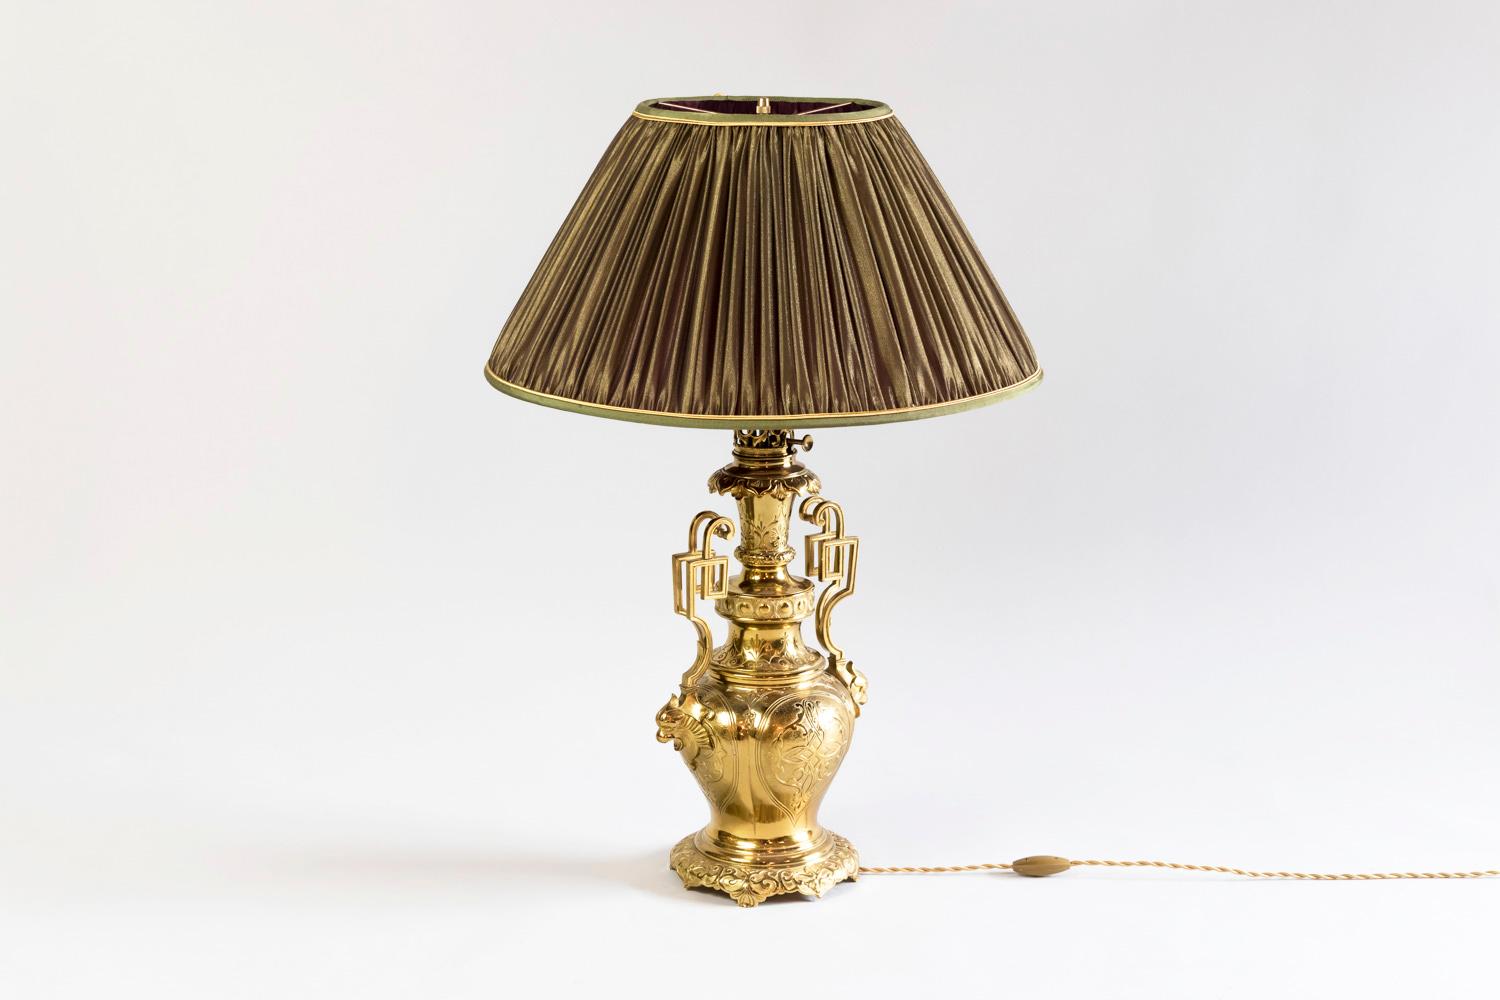 Pair of Arabian style lamps in chiselled and gilt brass bronze with a baluster shape standing on a circular quadripod scalloped base with motifs of scrolls on a guilloche background. Belly with canted and bulged corners each adorned with a large